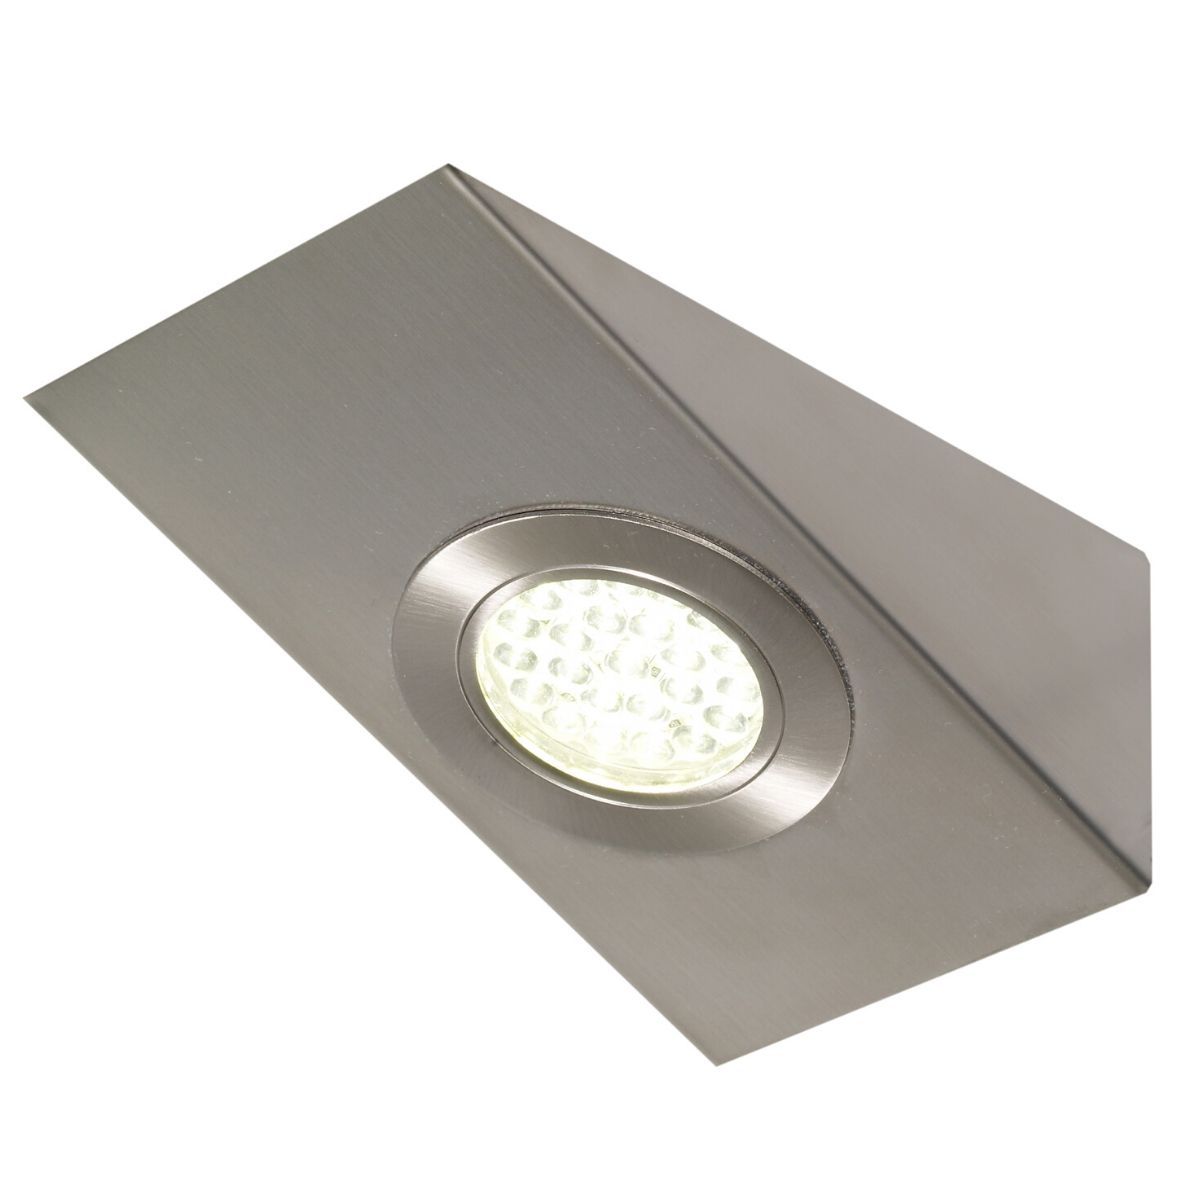 View Wedge LED Under Cabinet Light information